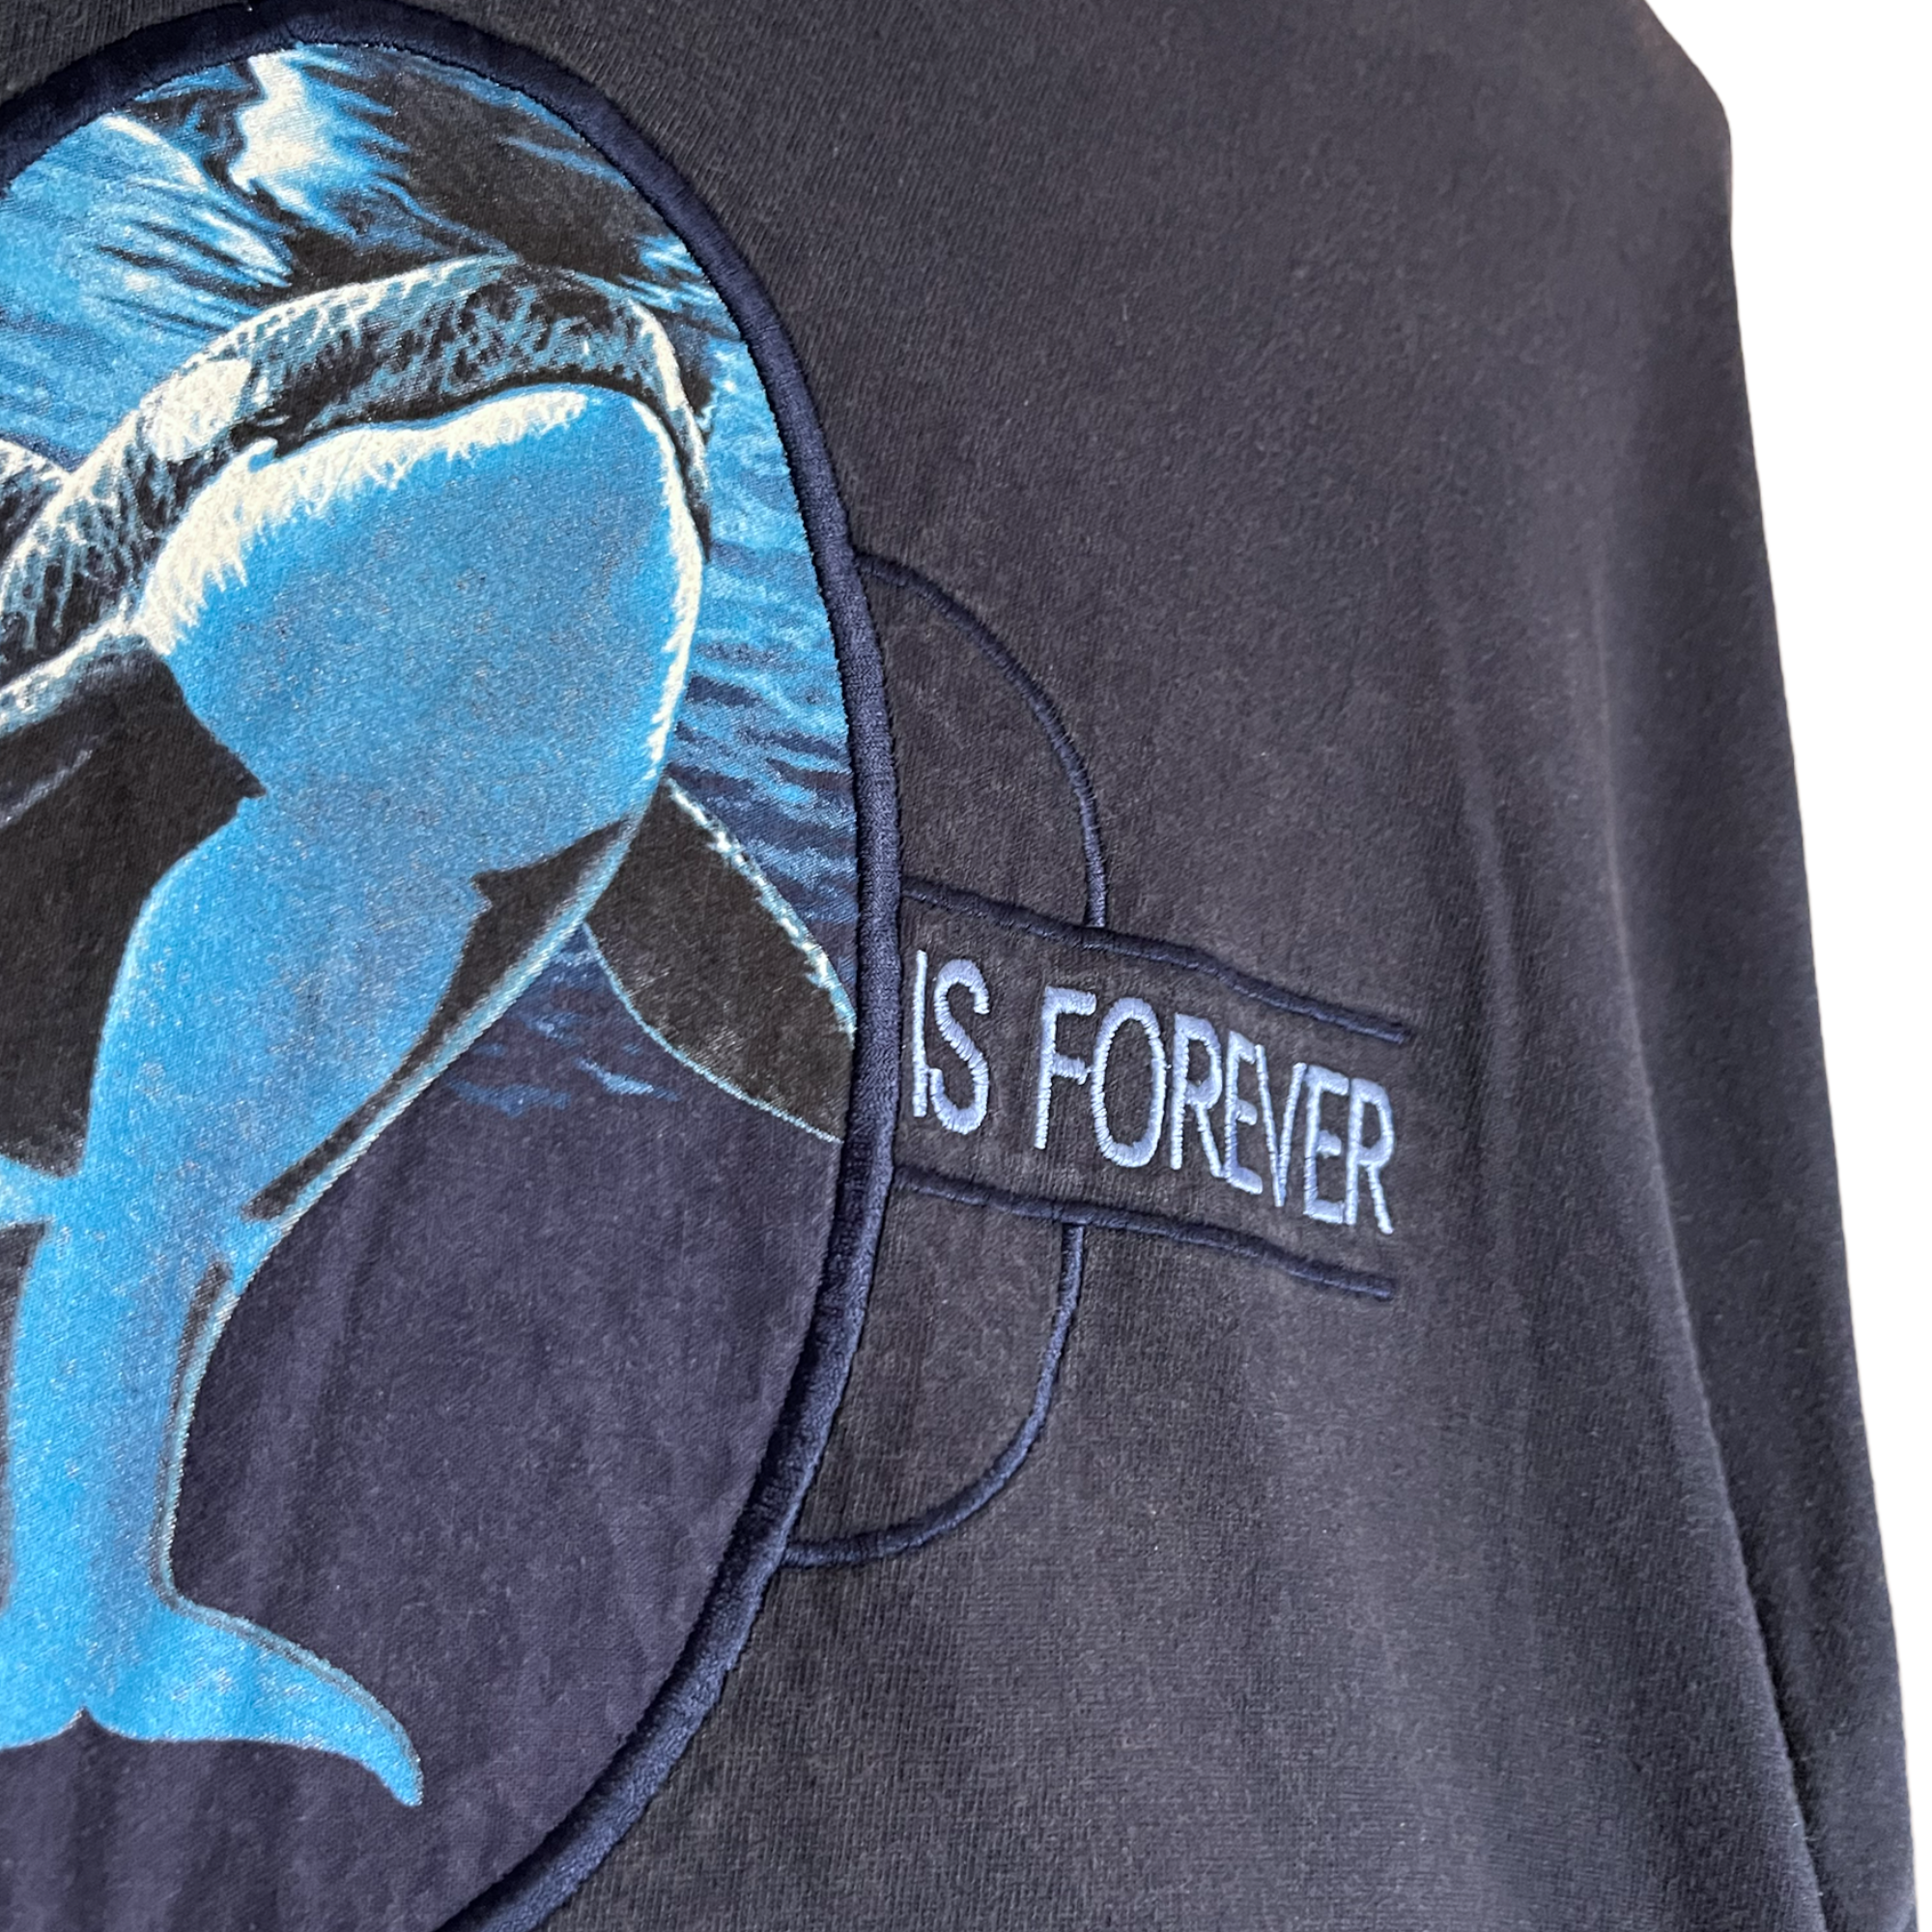 90s ‘Extinction is Forever’ Orca Whale Embroidered T-Shirt - Navy Blue - XL